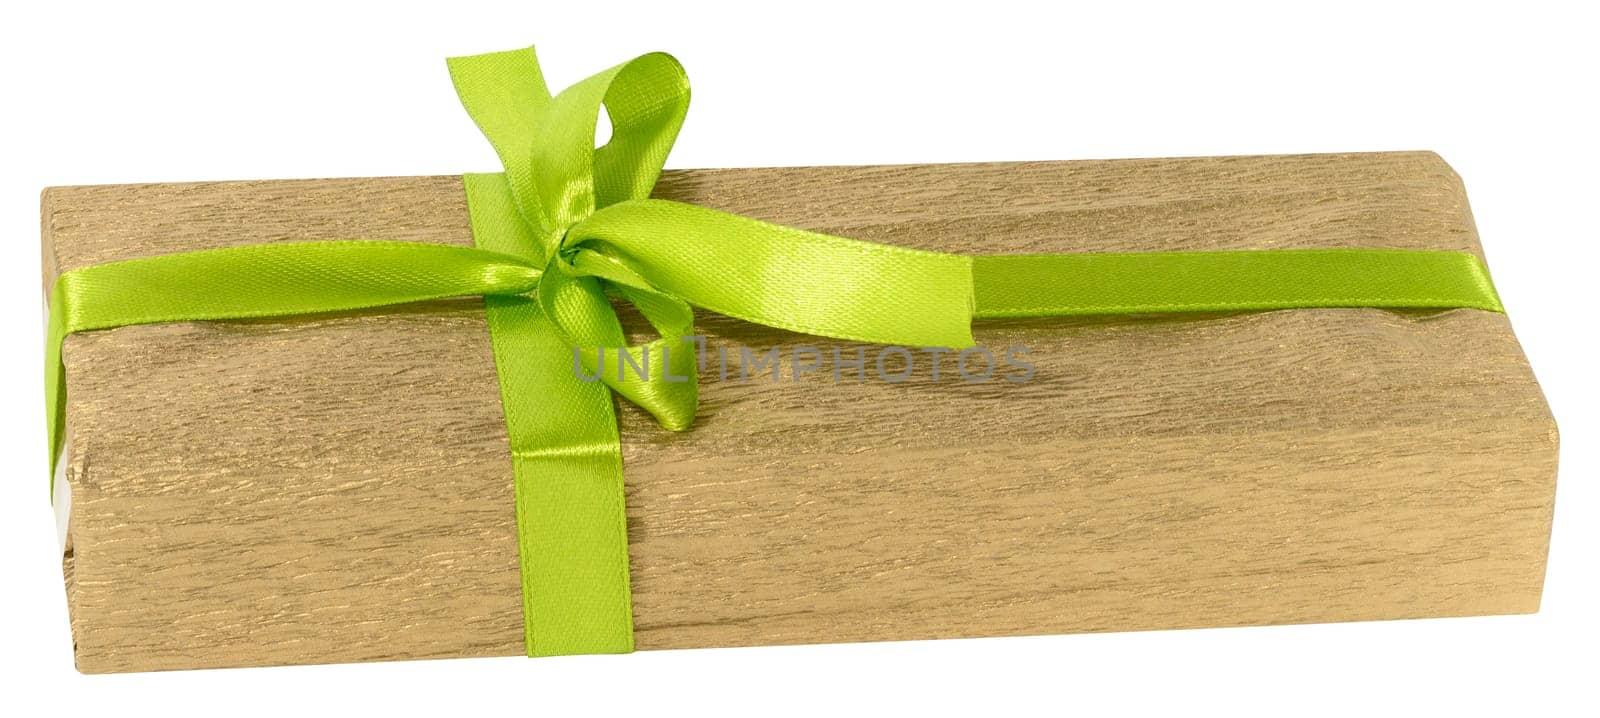 Box is wrapped in yellow gift wrapping and green ribbon on a white isolated background by ndanko